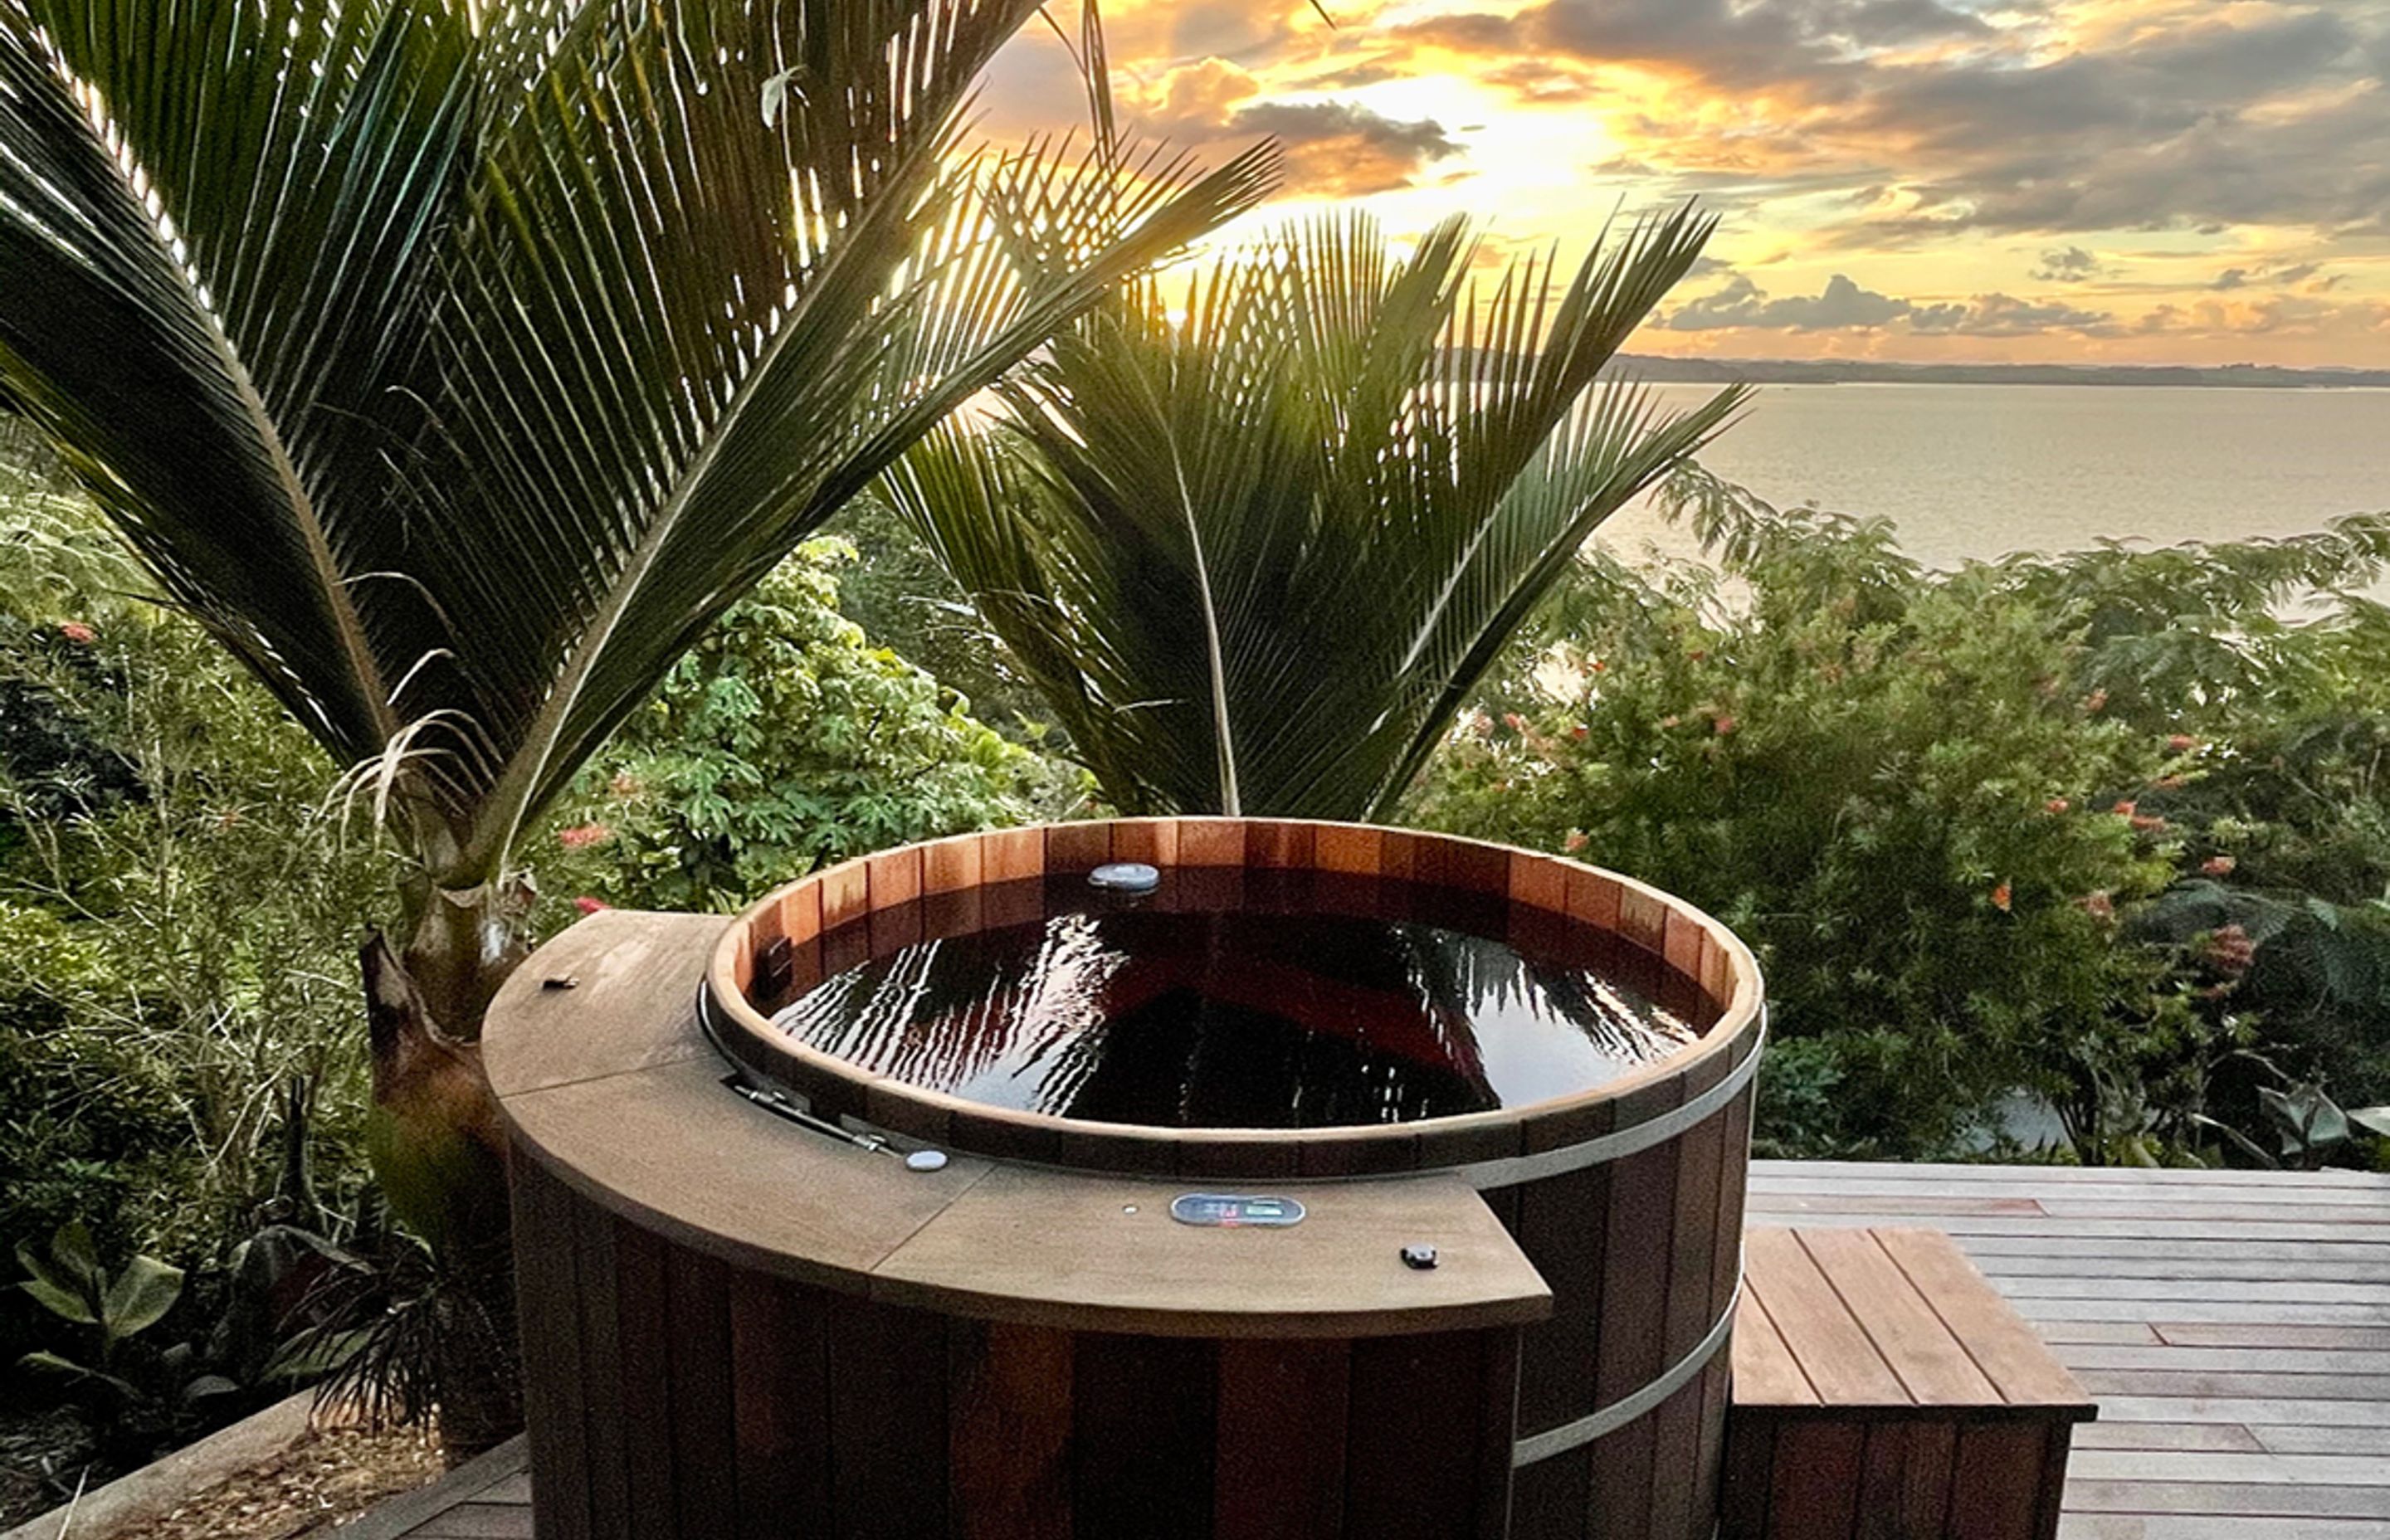 Want to soak in the ambience while soaking in your hot tub? Consider an electric element or gas heater option for heating your hot tub without creating any noise to detract from the surroundings.